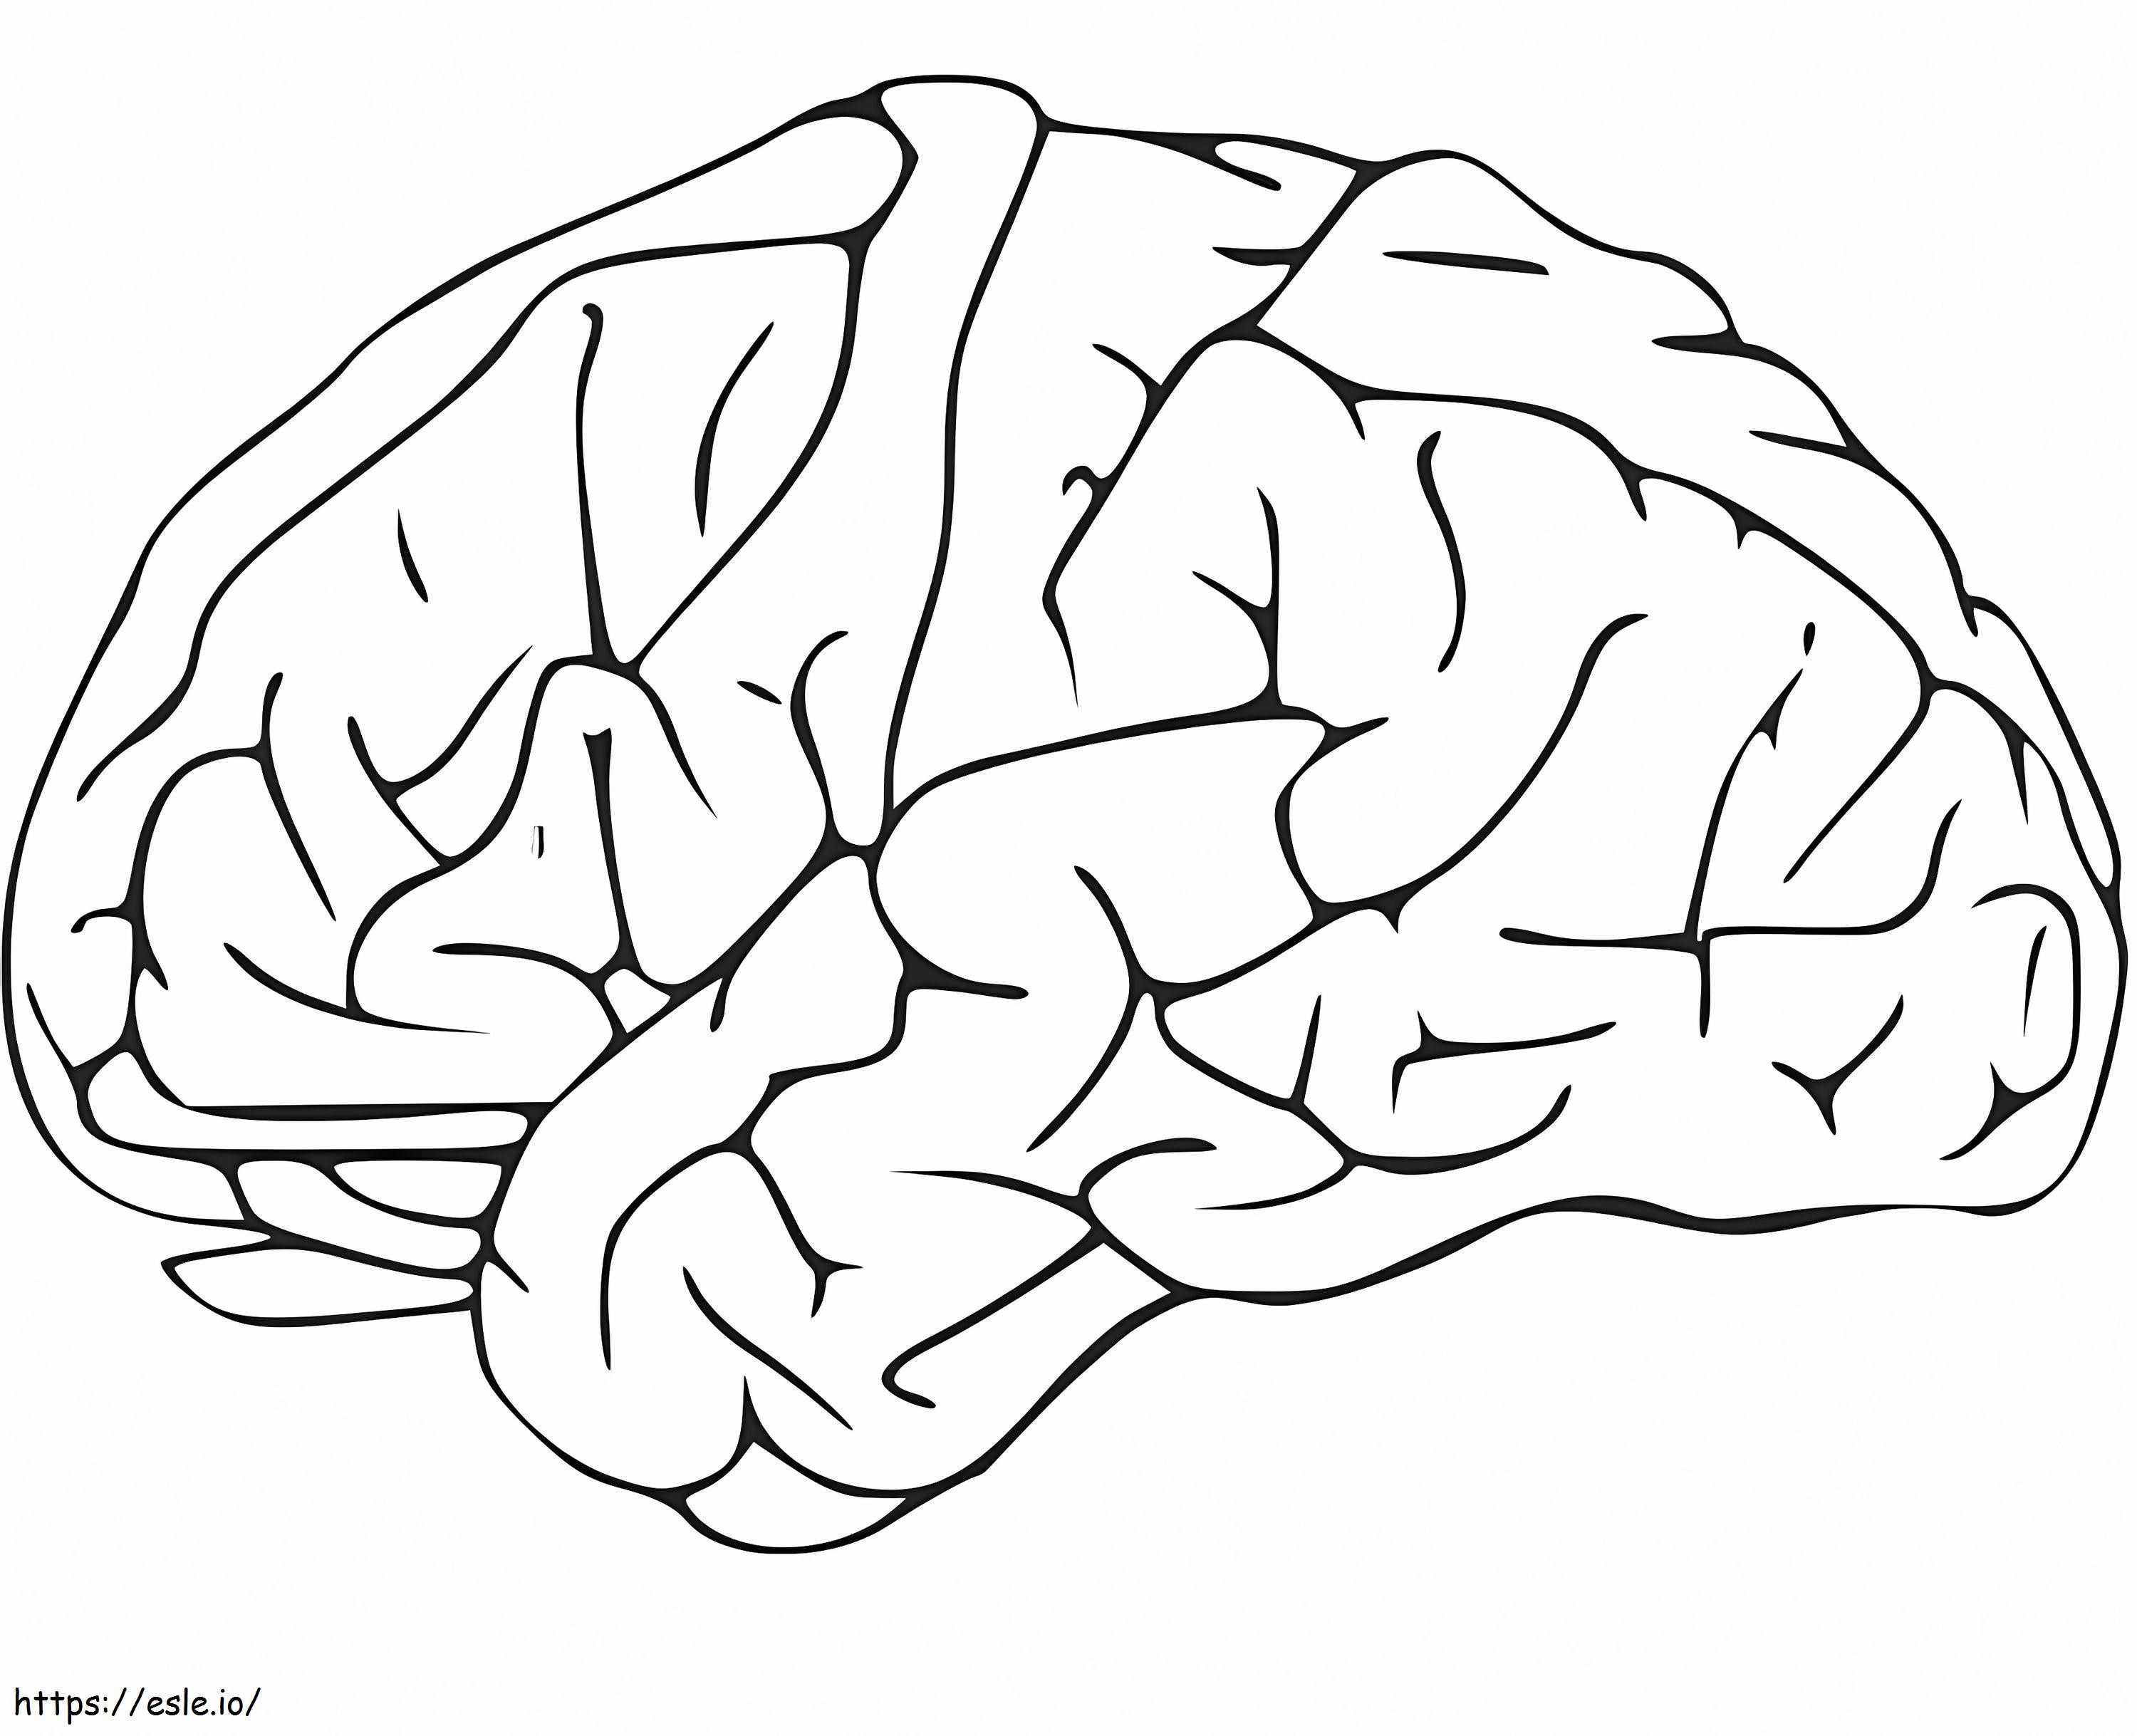 Human Brain 10 coloring page